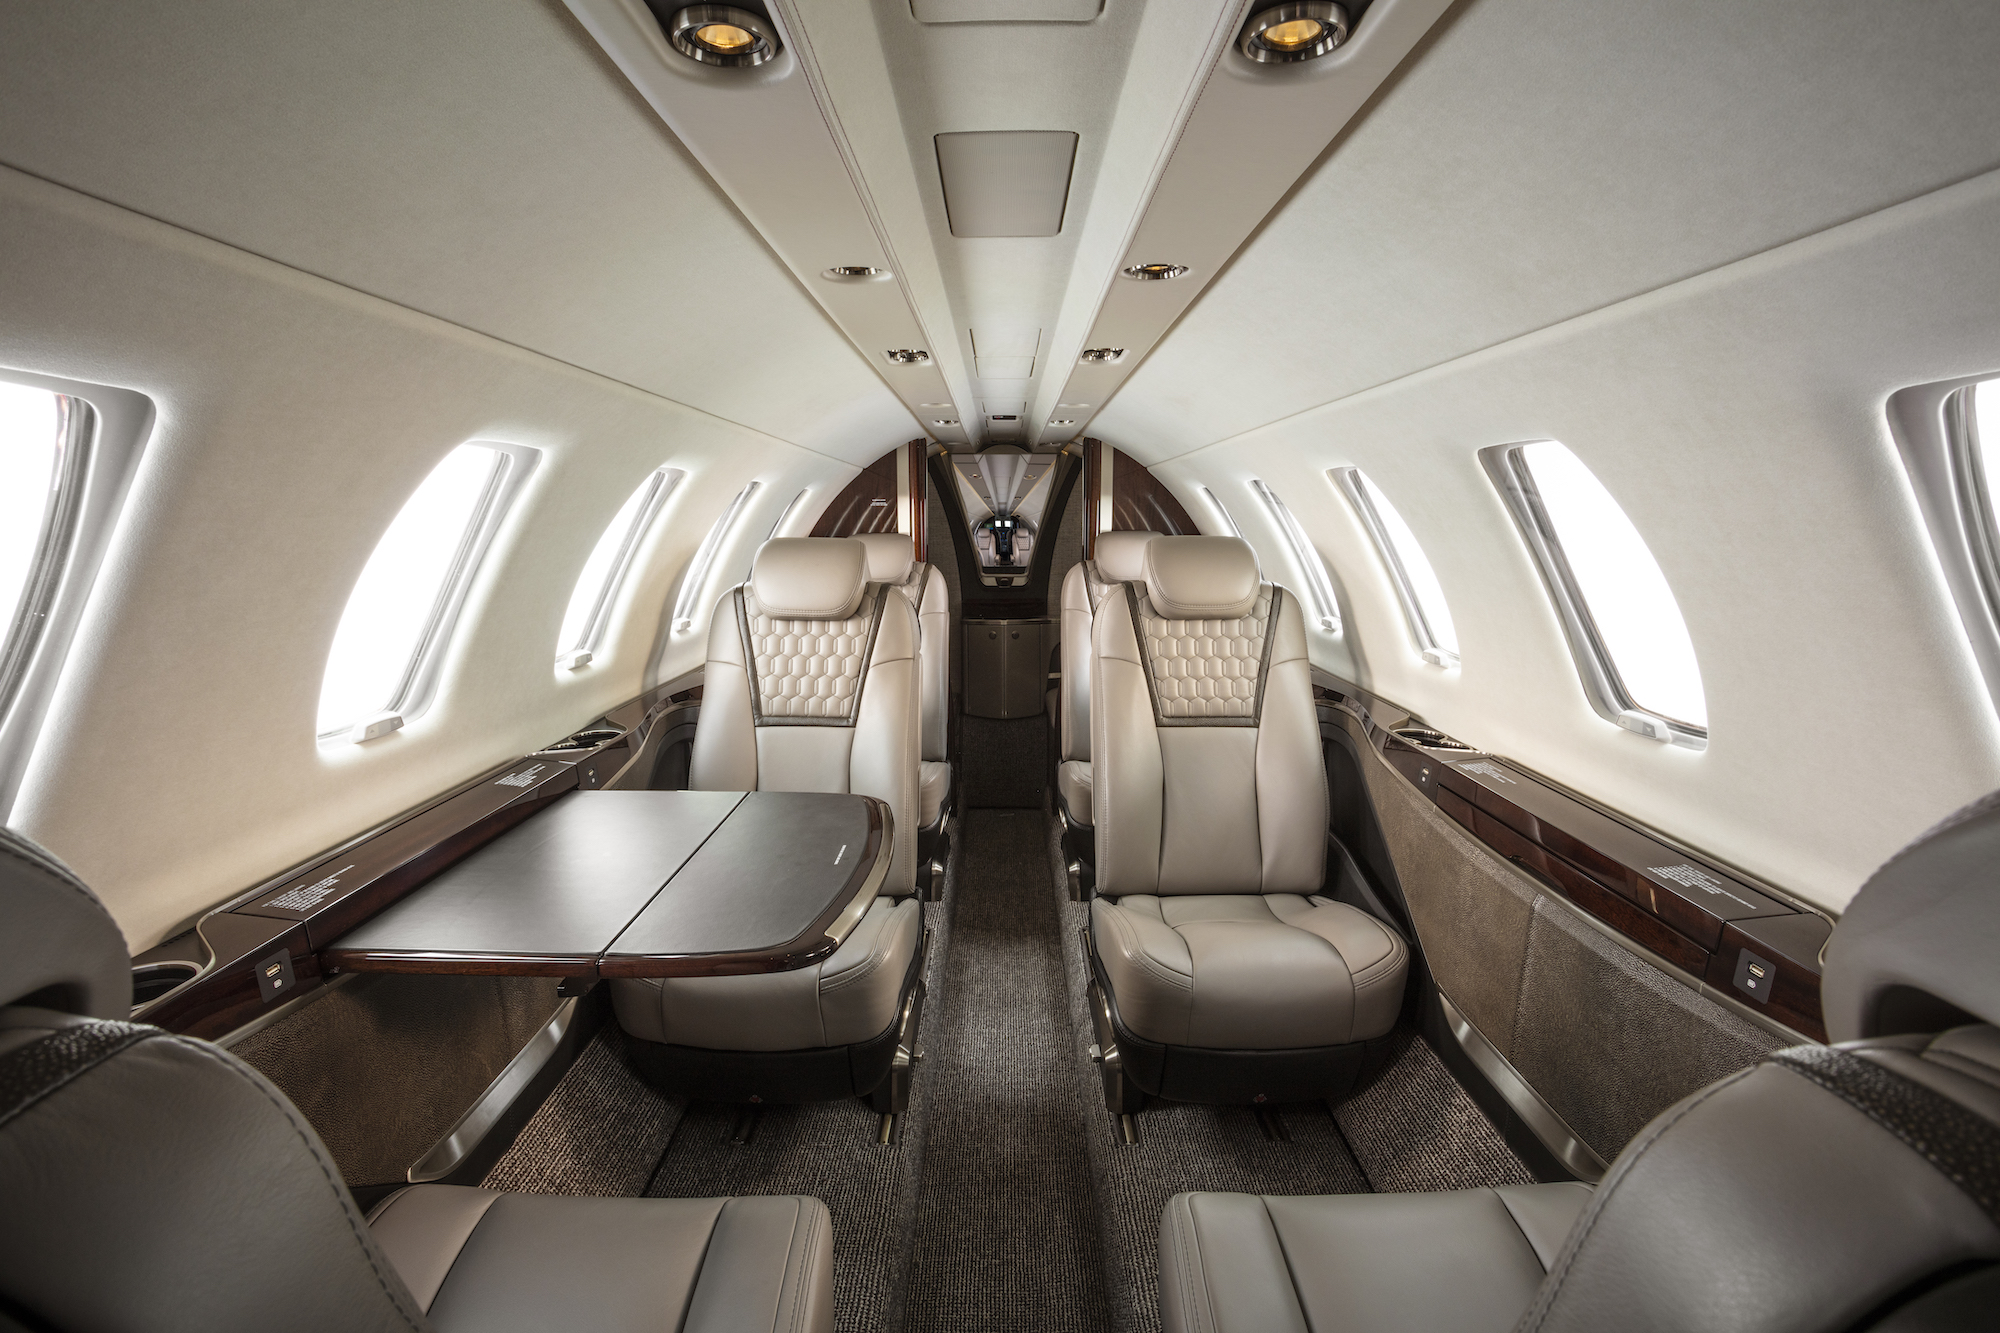 Main-cabin-of-the-Cessna-Citation-CJ4-Gen2,-with-four-executive-style-seats-upholstered-in-beige-leather-in-a-club-configuration.-A-retractable-table-is-partially-extended-on-one-side. 